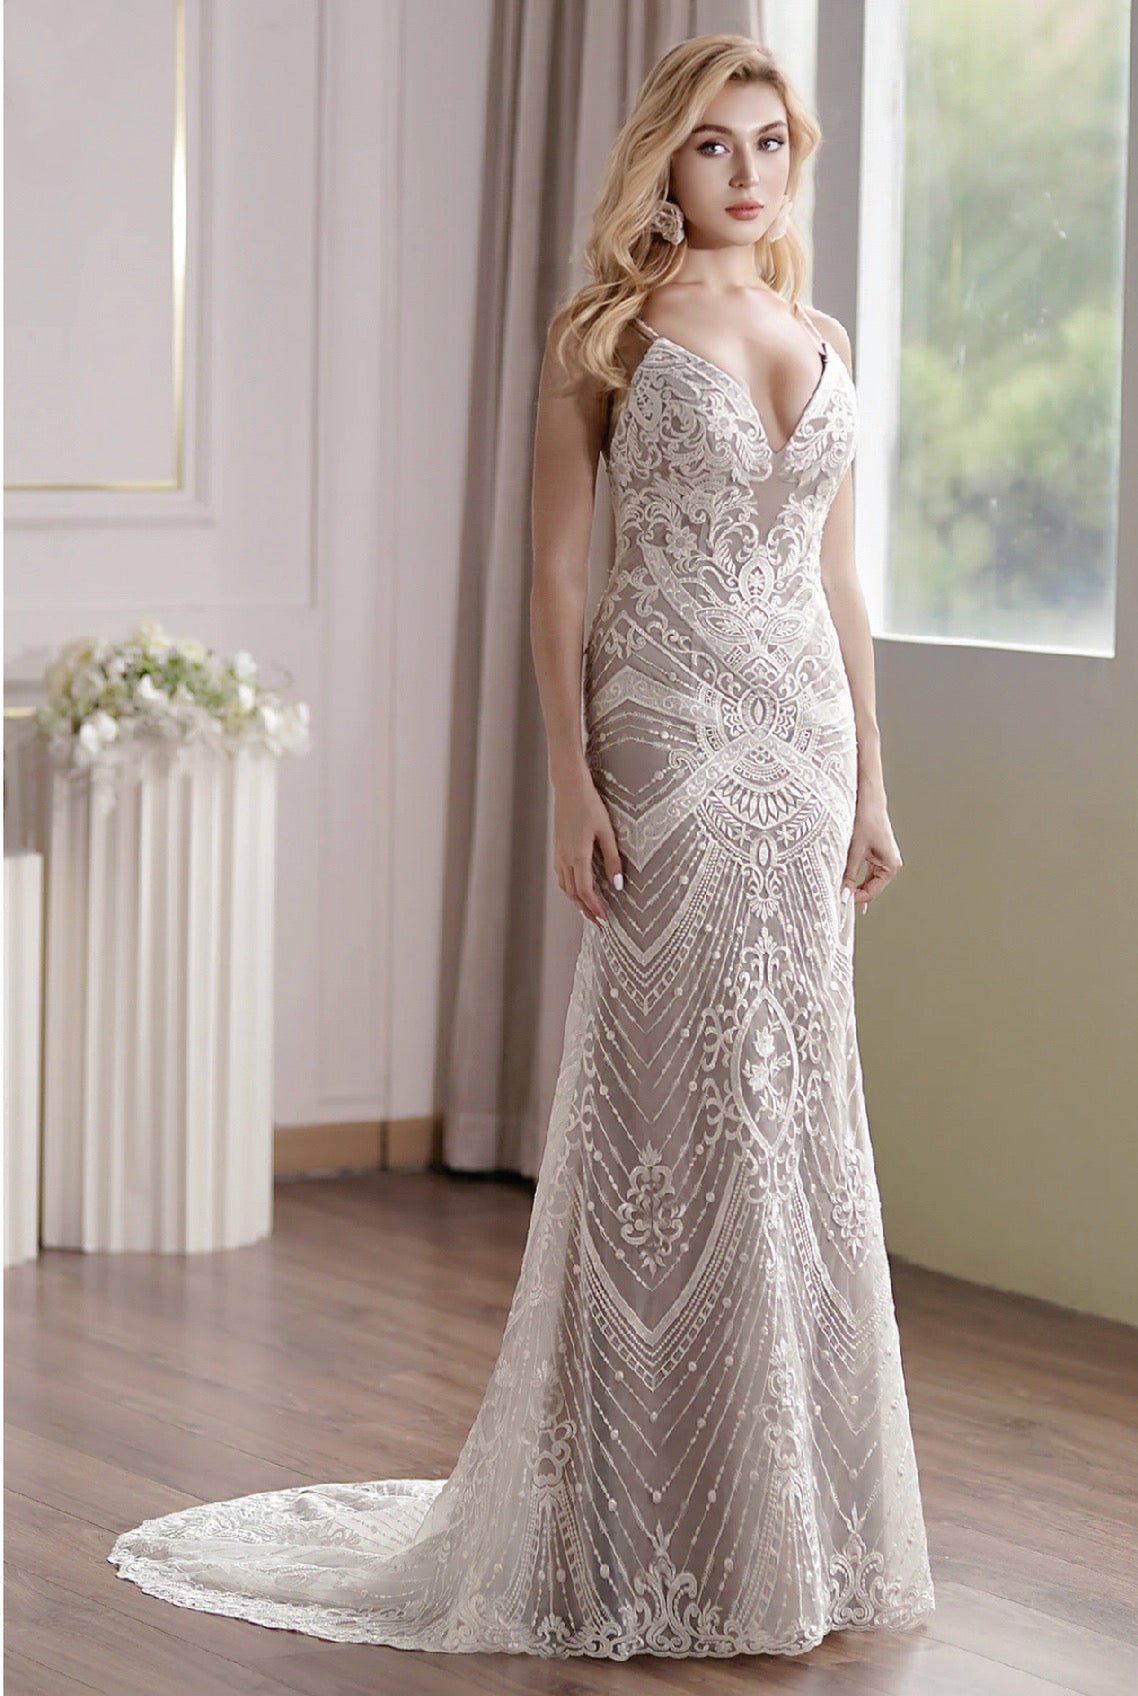 Glamorous Lace Embroidery Fit-and-Flare Mermaid Wedding Gown With Plunging Neckline - Plus Size - WonderlandByLilian